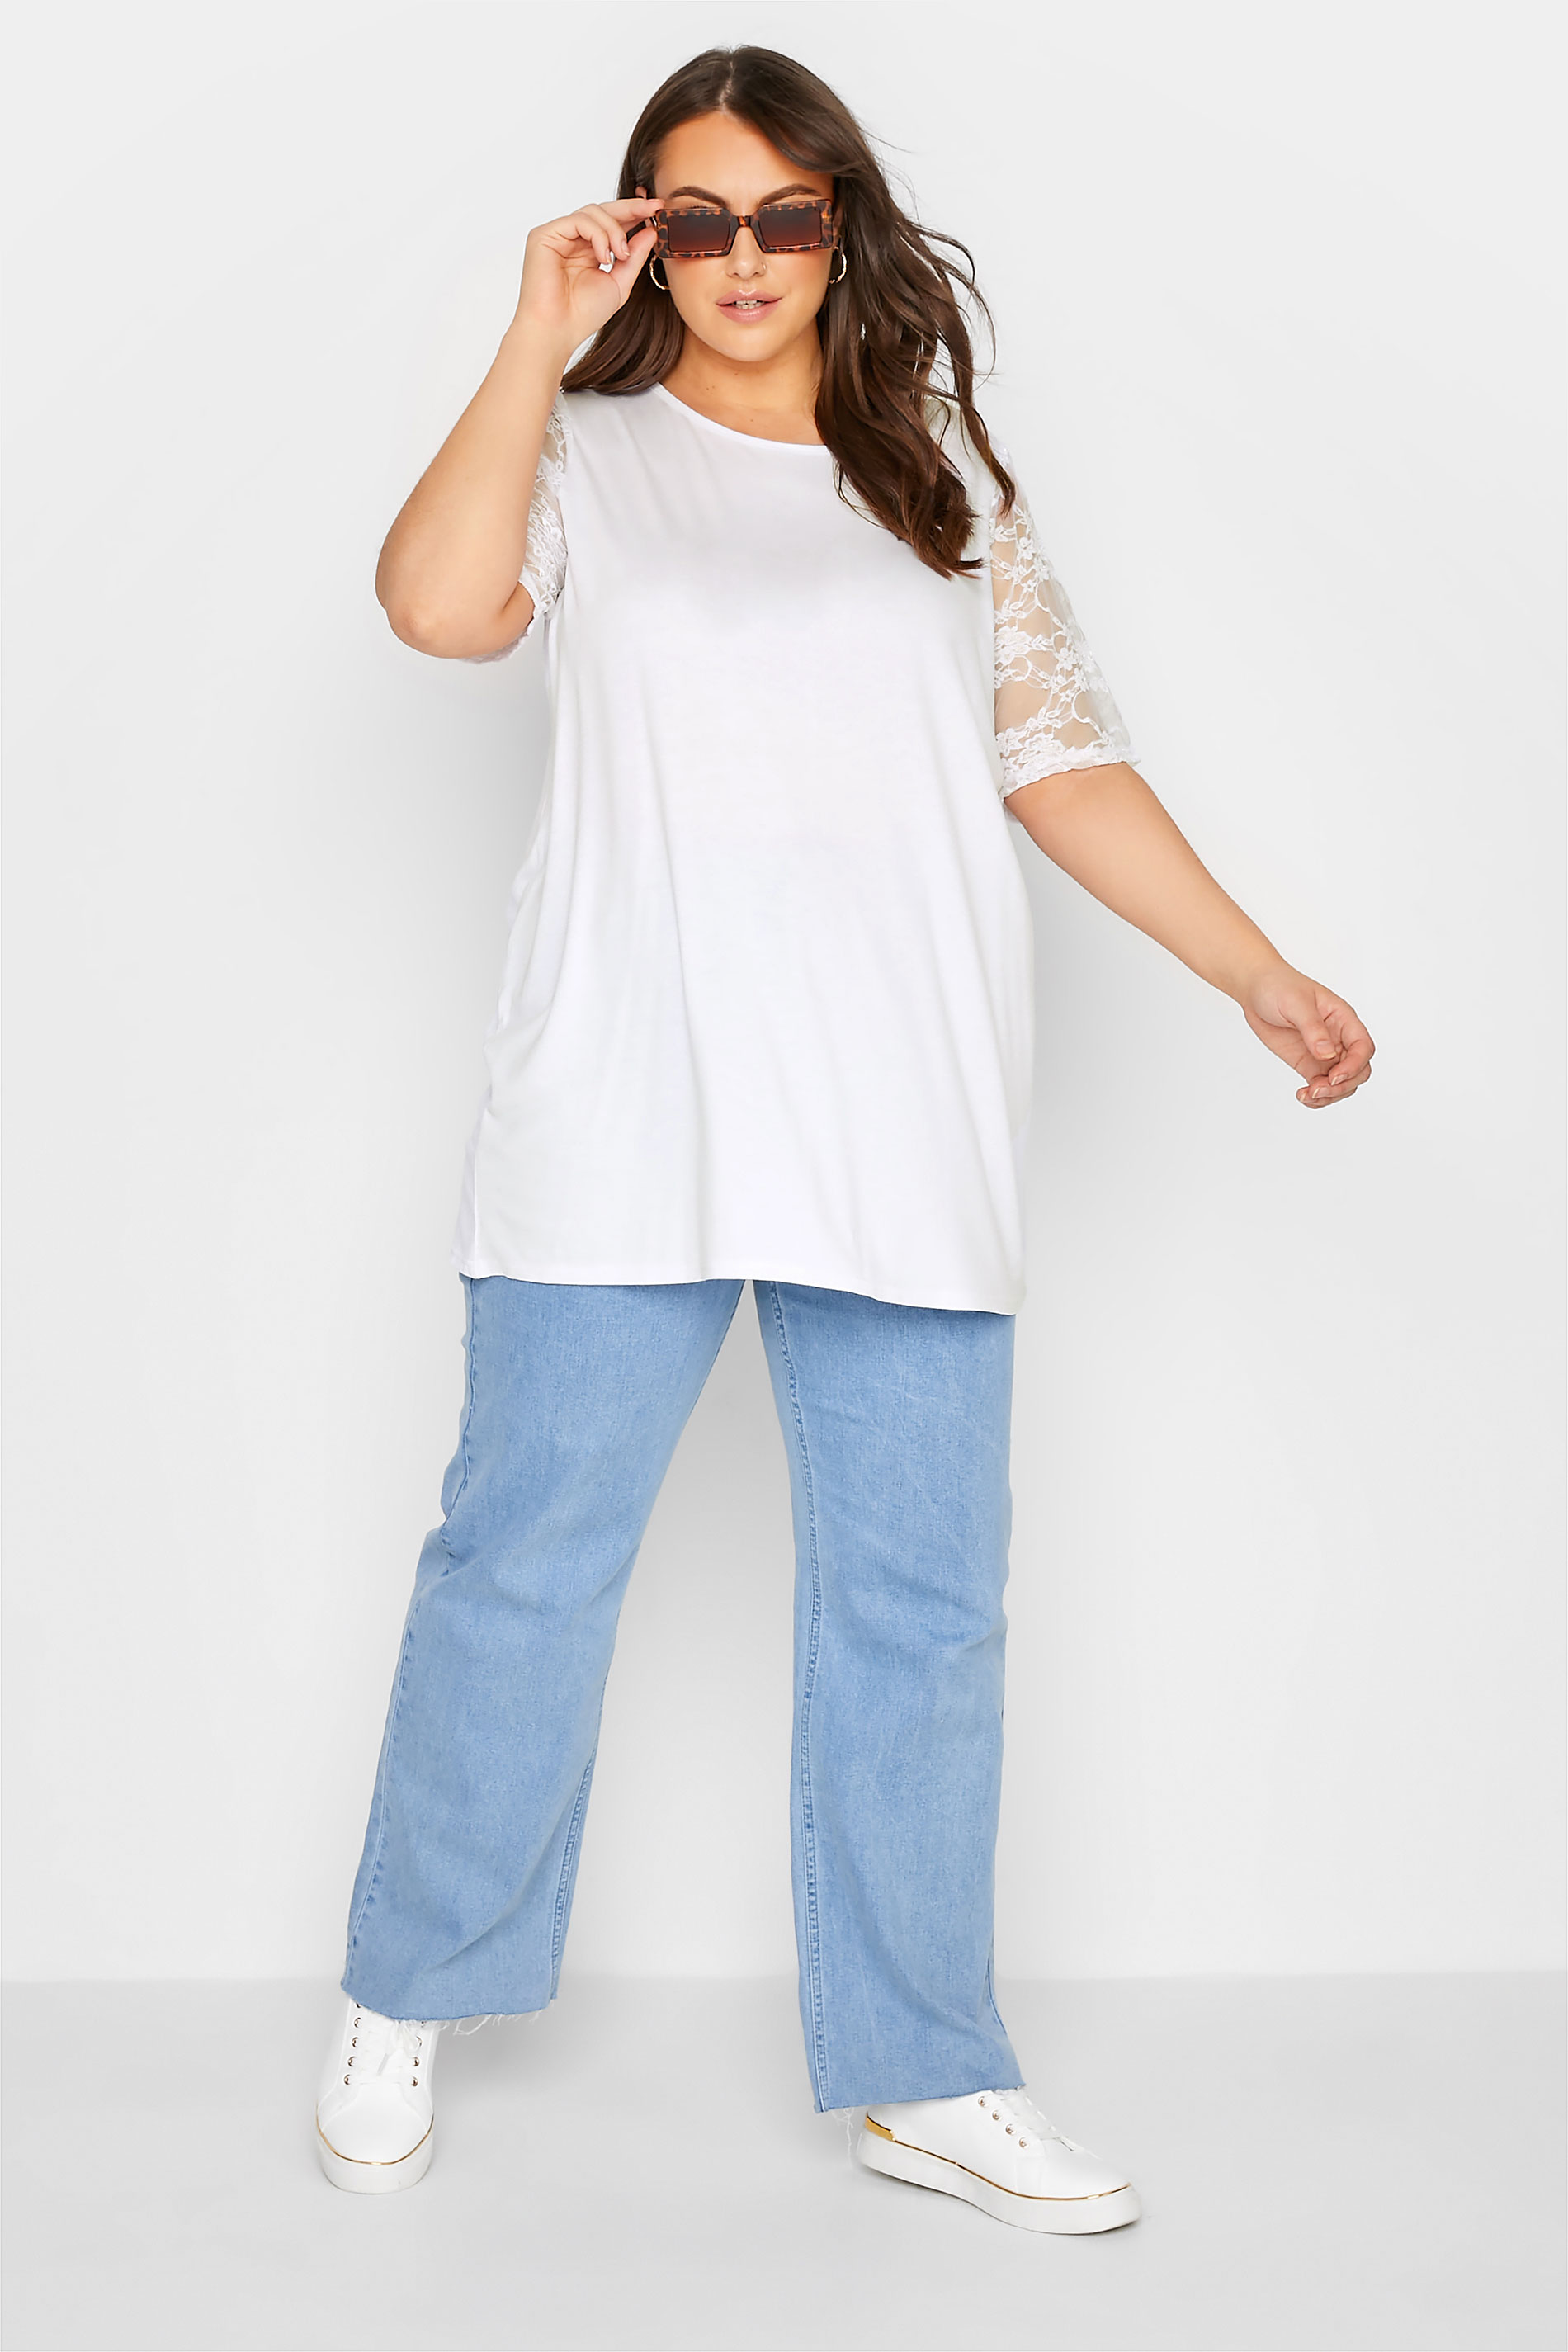 Grande taille  Tops Grande taille  Tops dentelle | LIMITED COLLECTION - Top Blanc Manches Courtes Dentelle - UB34704